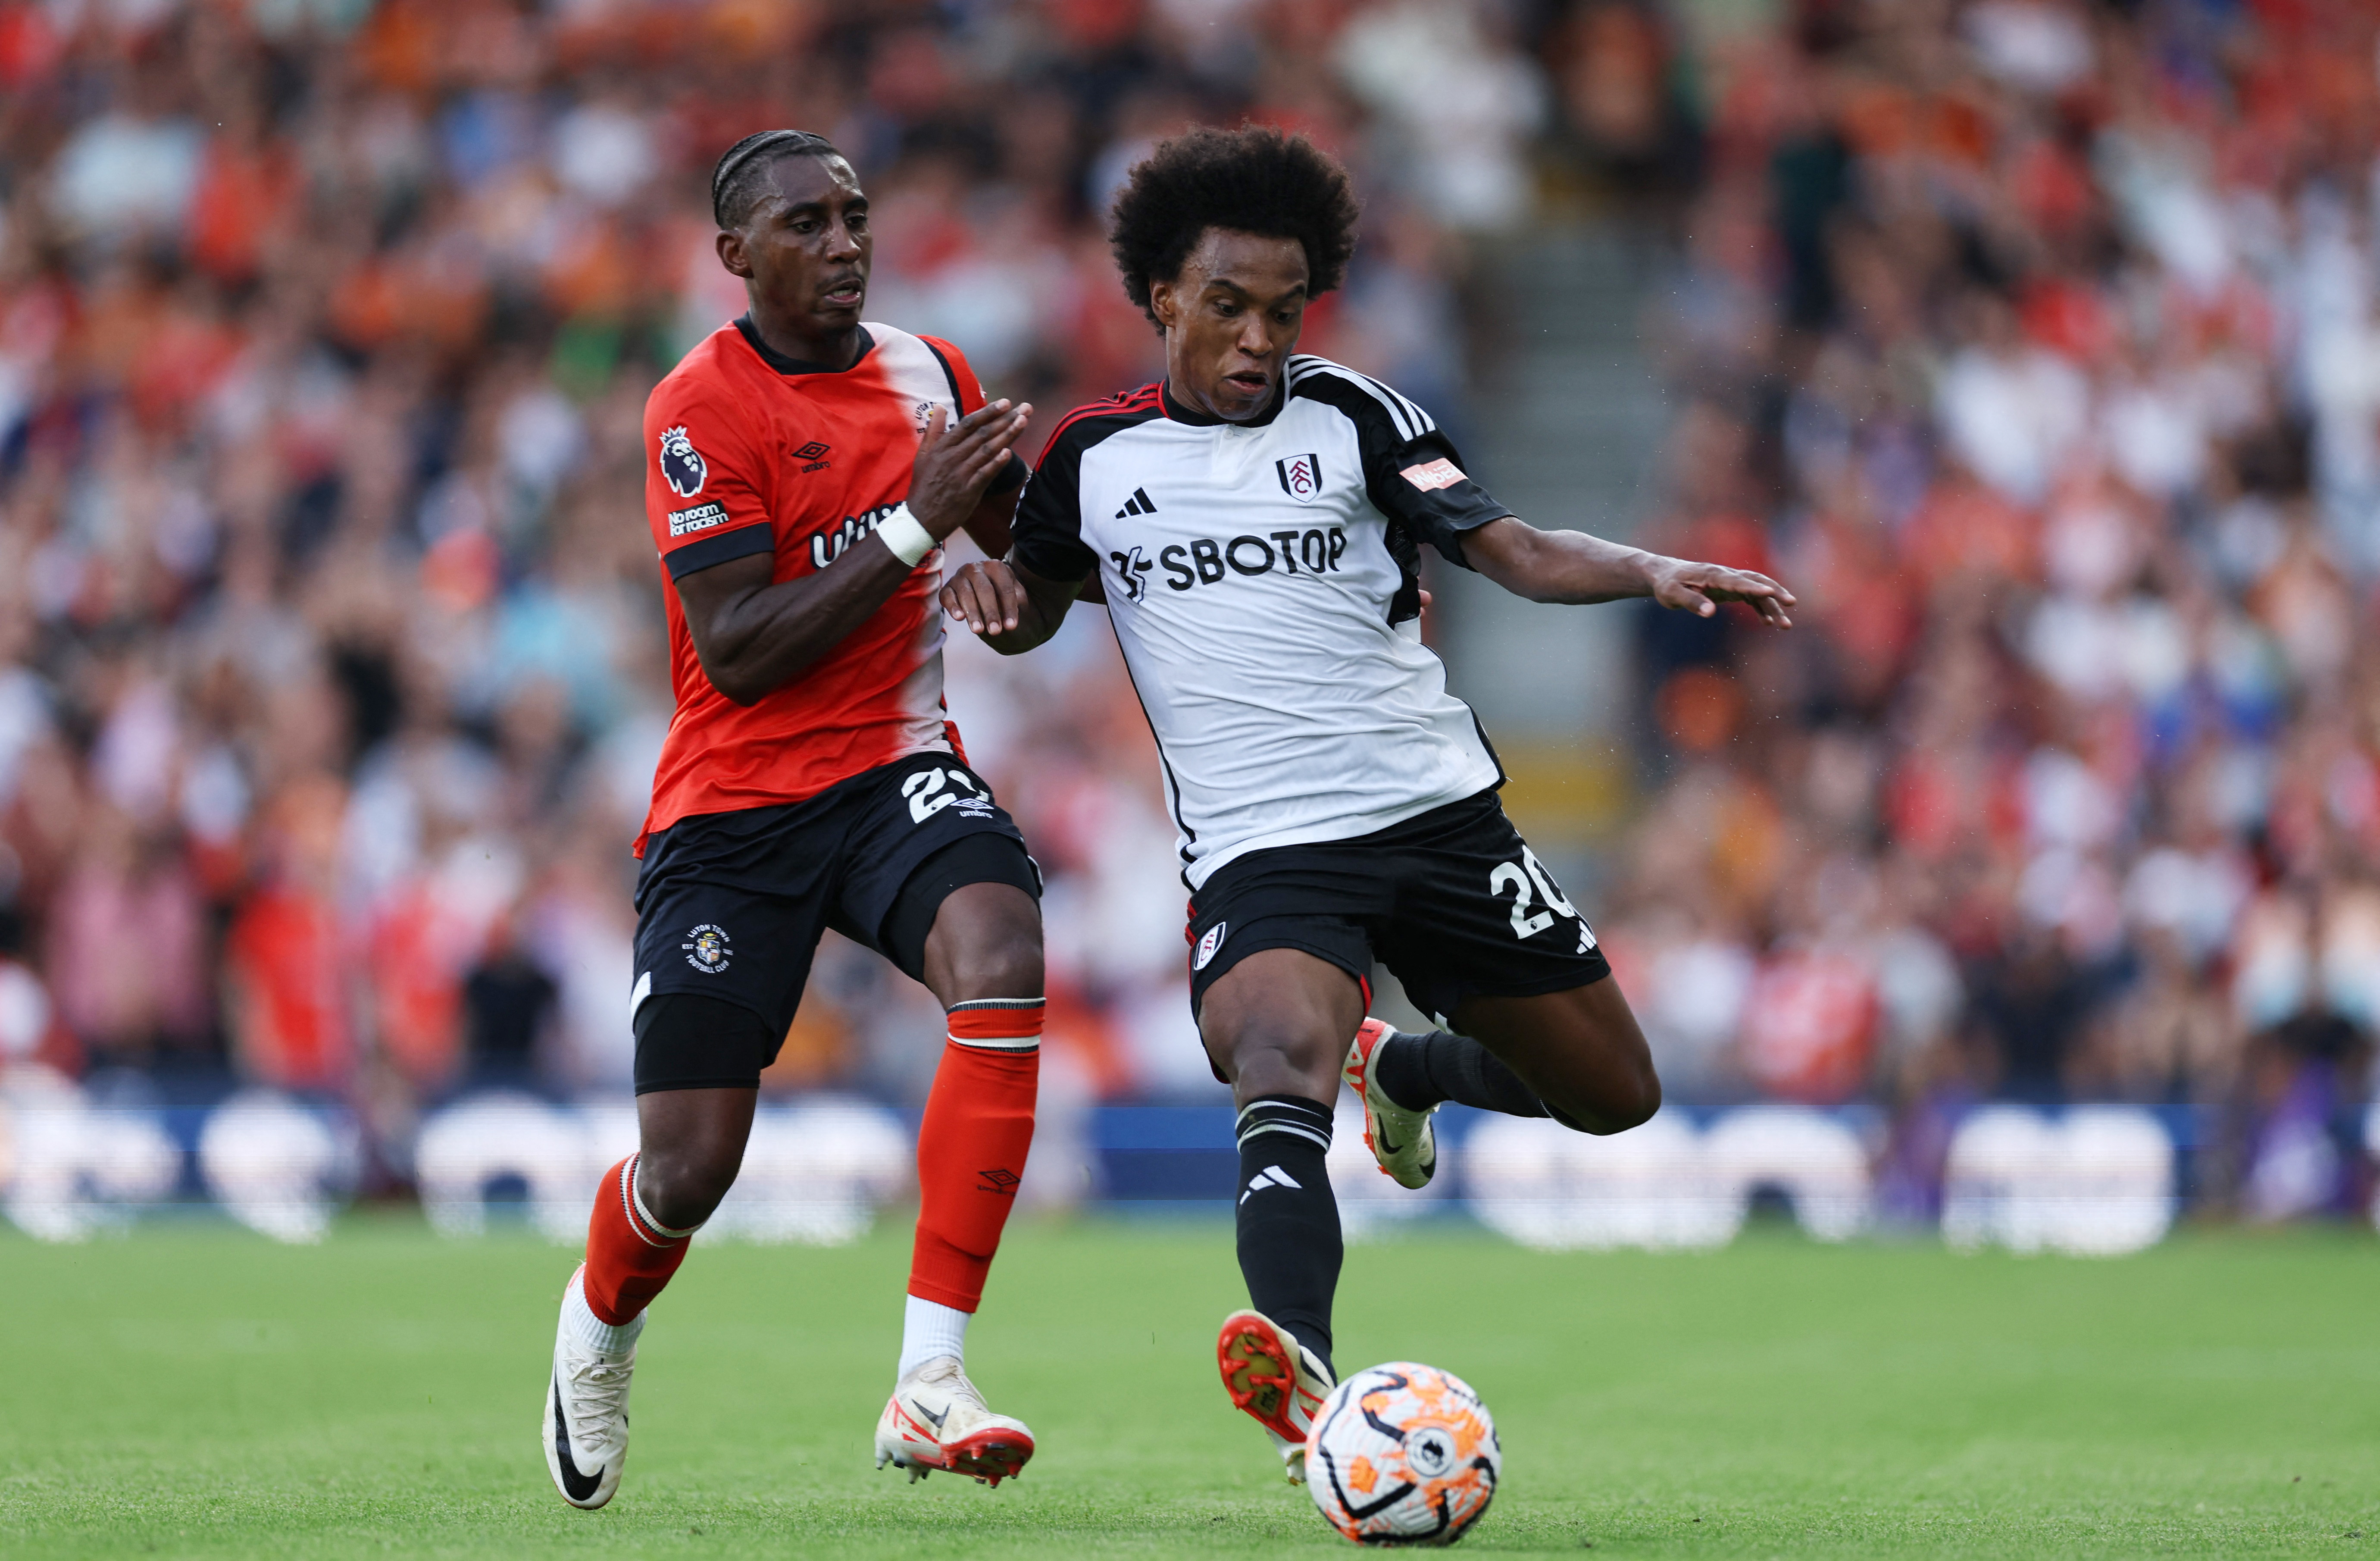 Last-place Luton still waiting for 1st EPL point after loss to Fulham